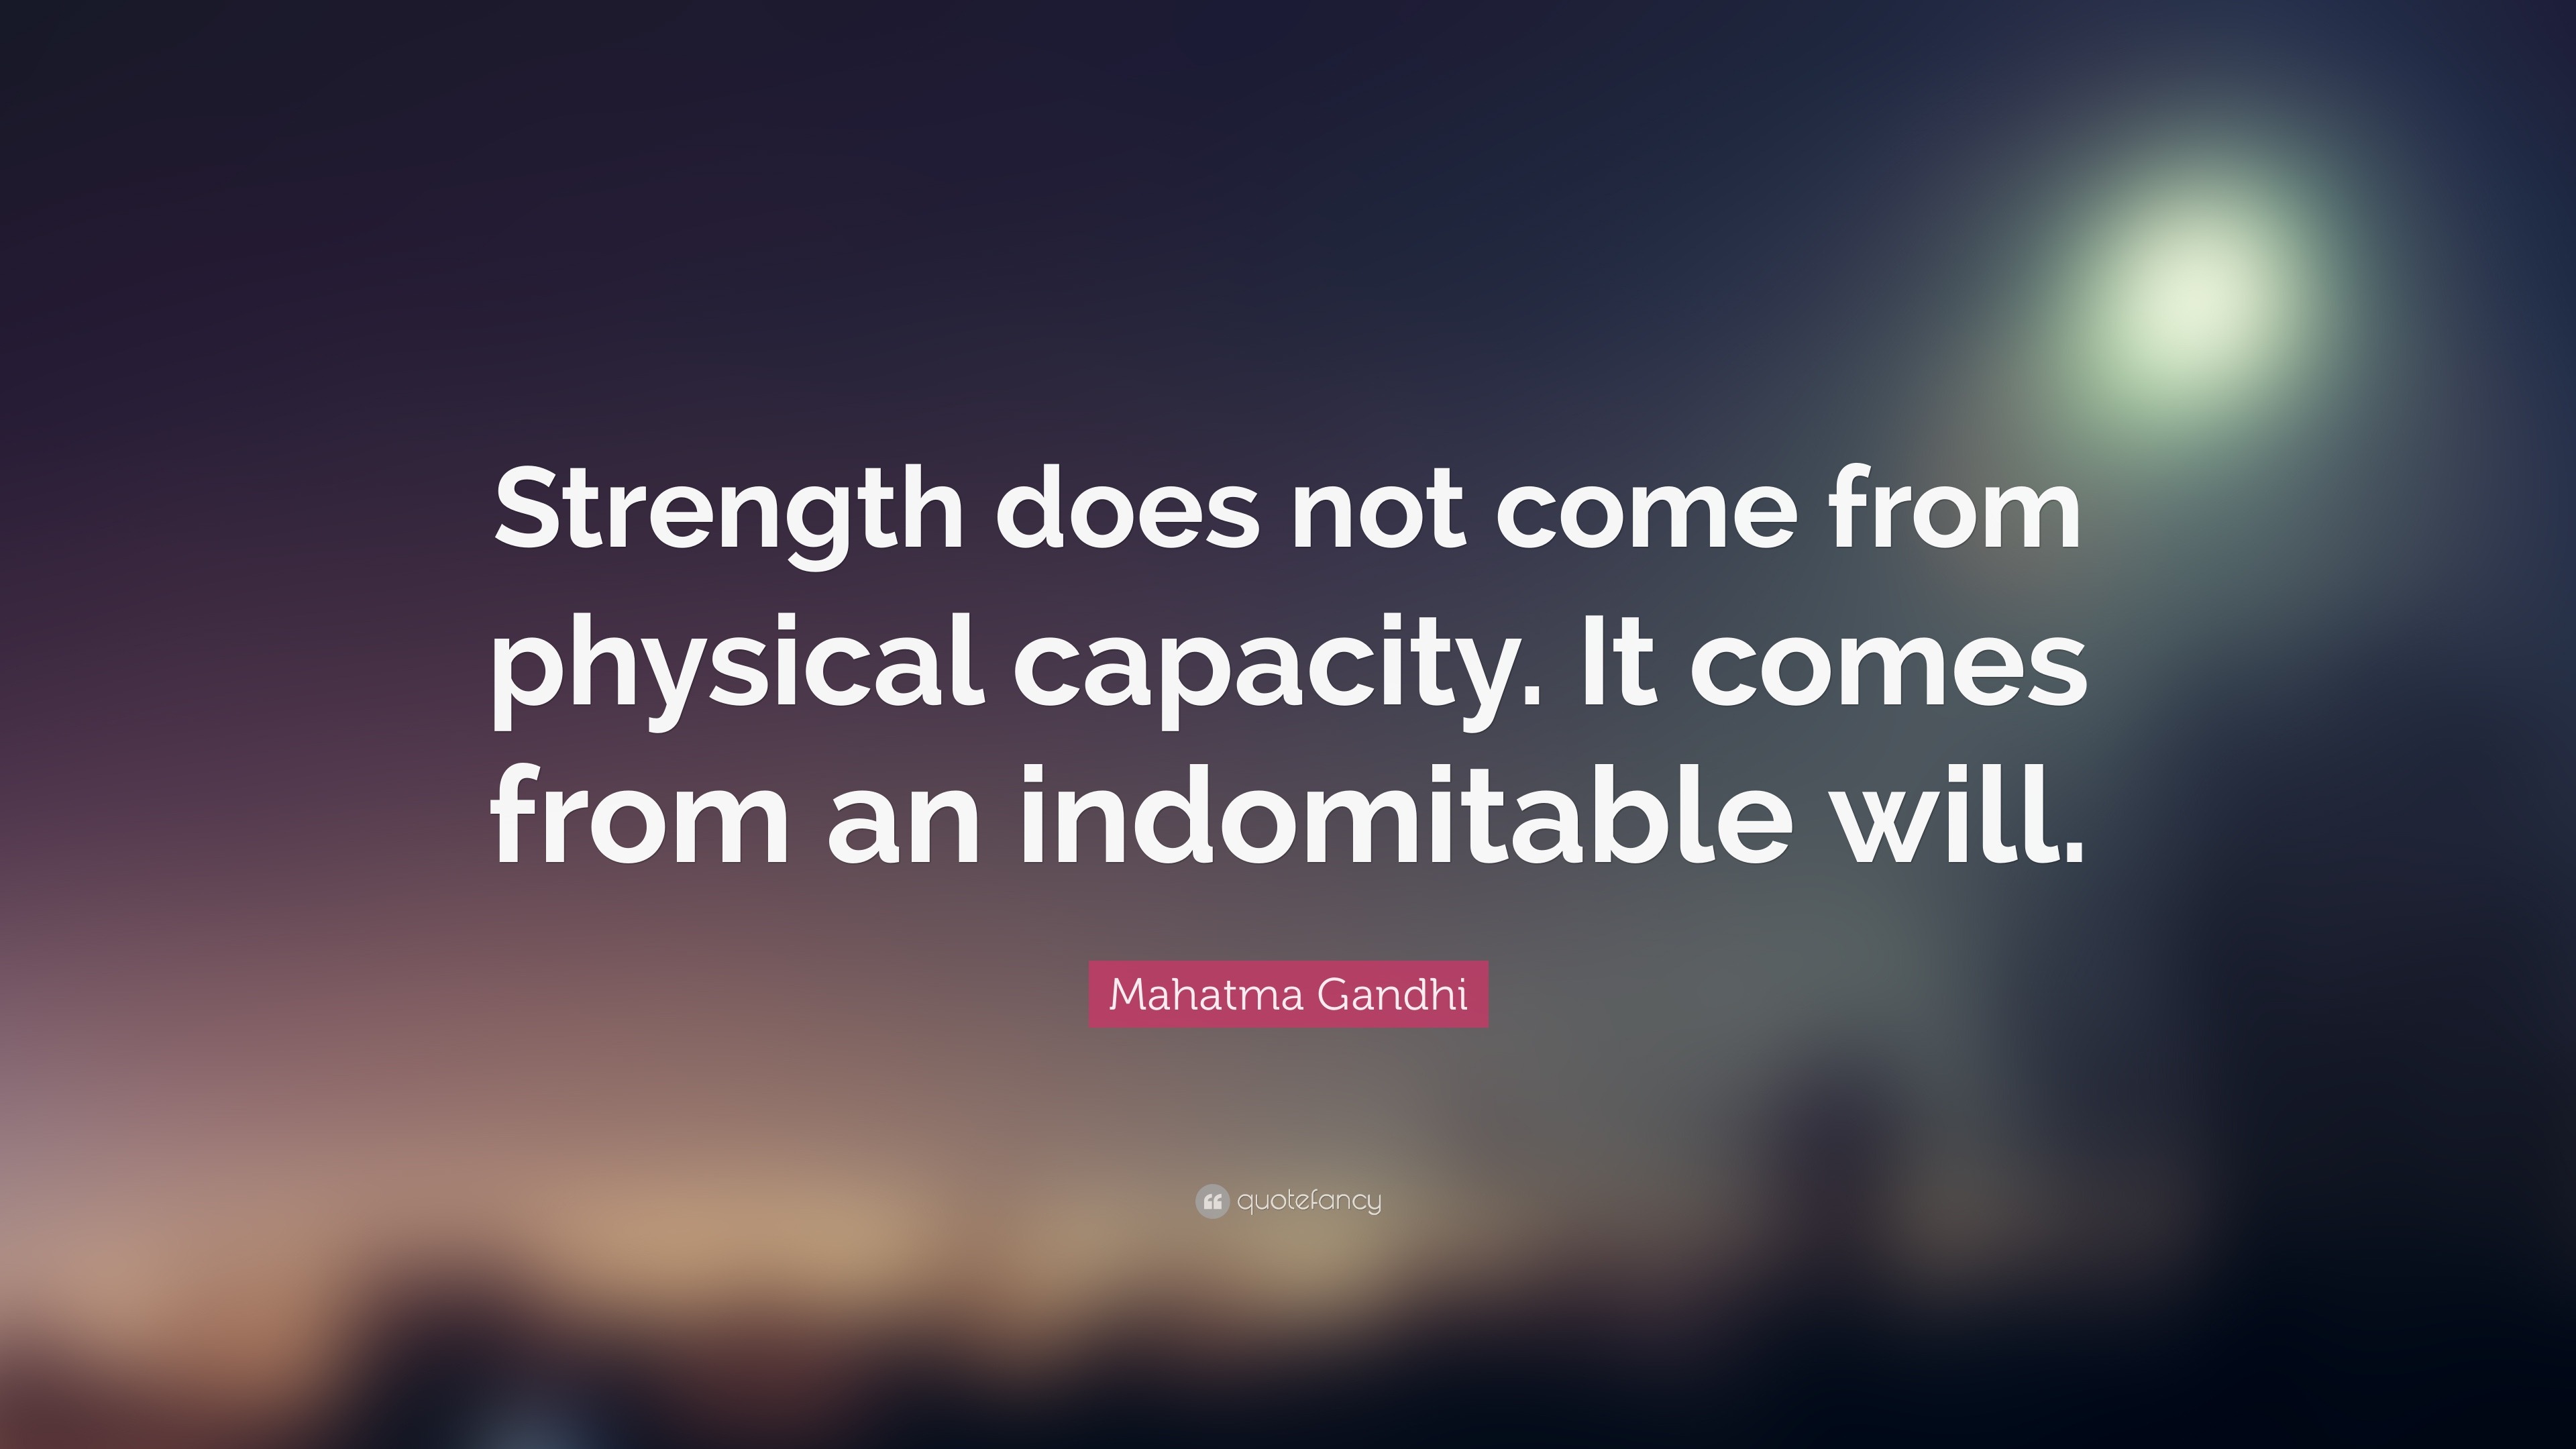 Mahatma Gandhi Quote: “Strength does not come from physical capacity